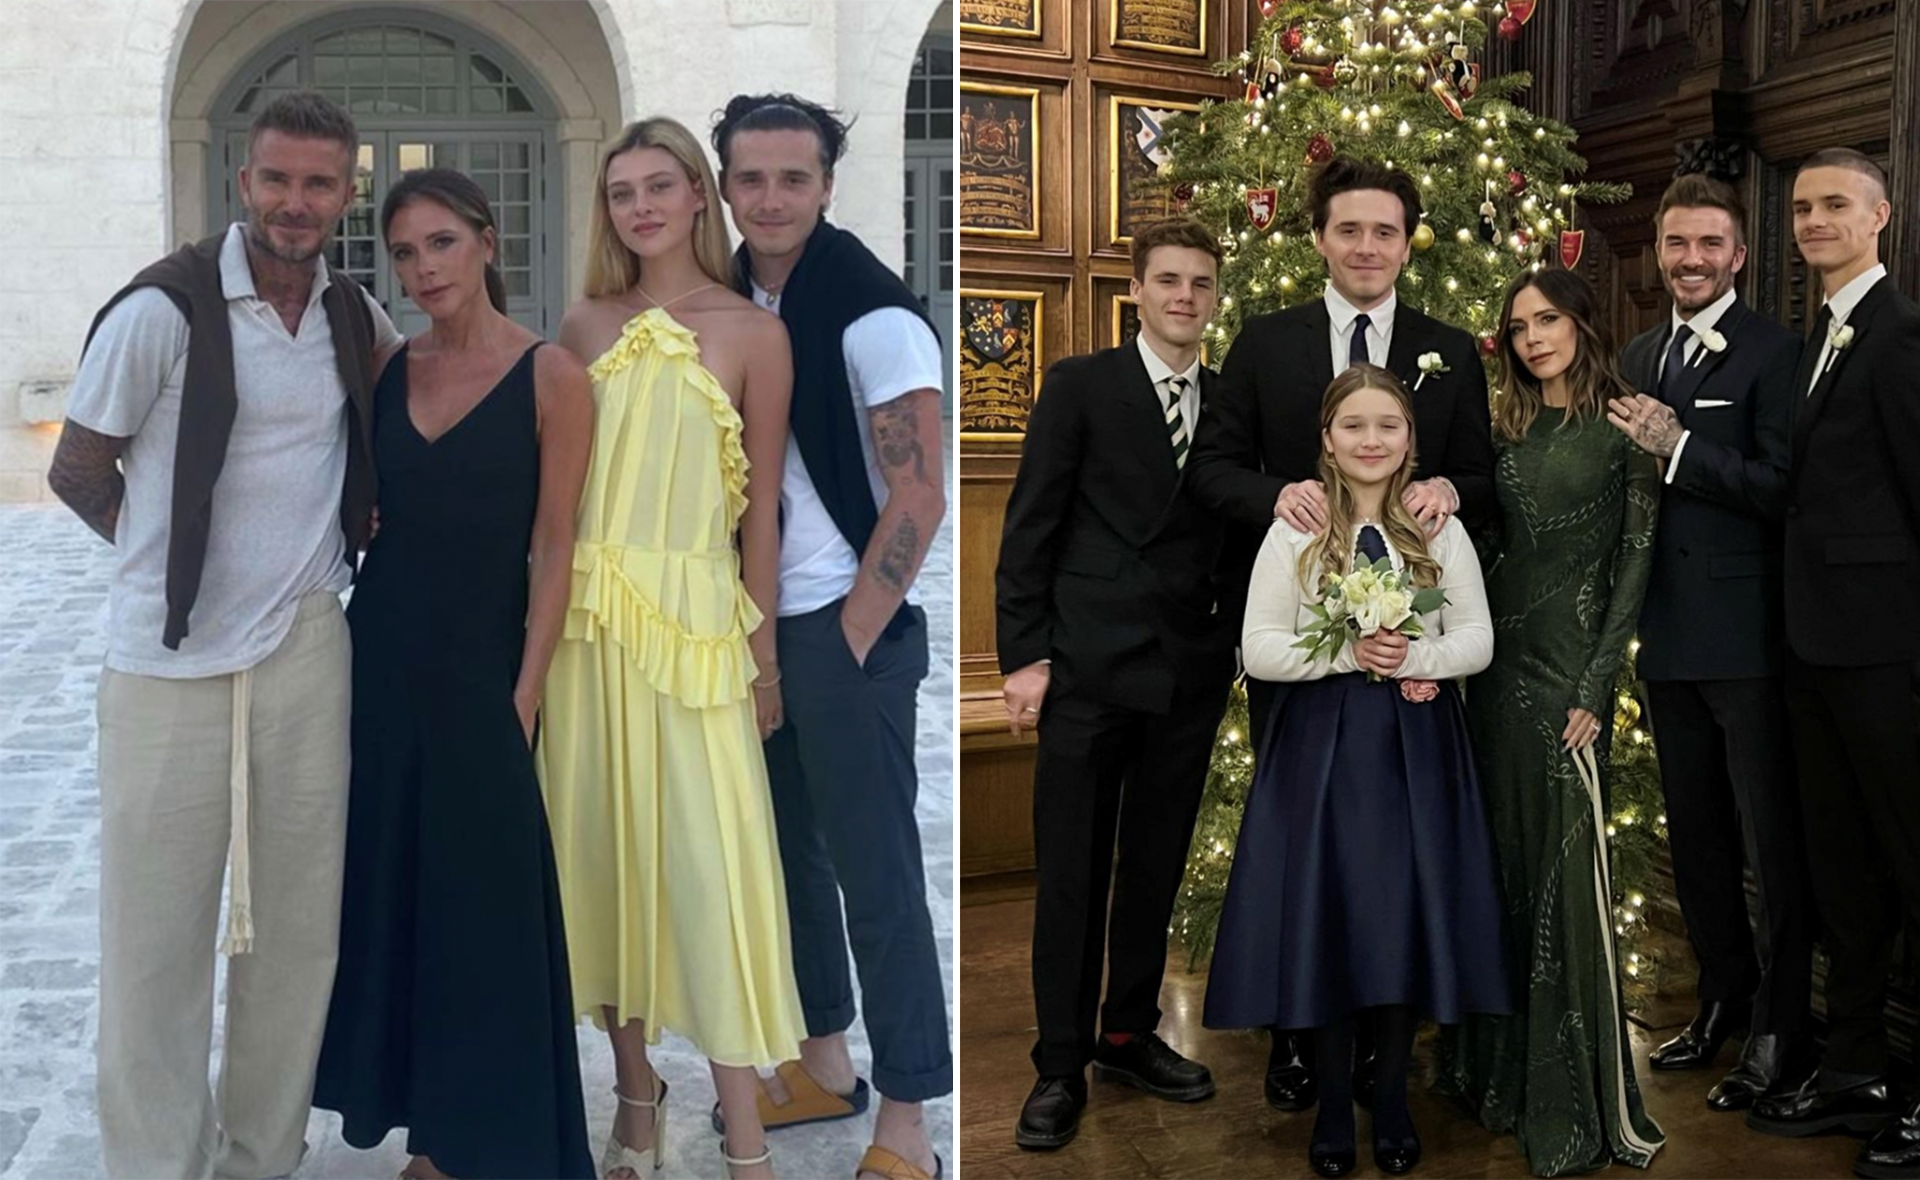 As the Beckhams prepare to welcome Brooklyn’s fiancée Nicola Peltz into their family, we look back at their sweetest pics